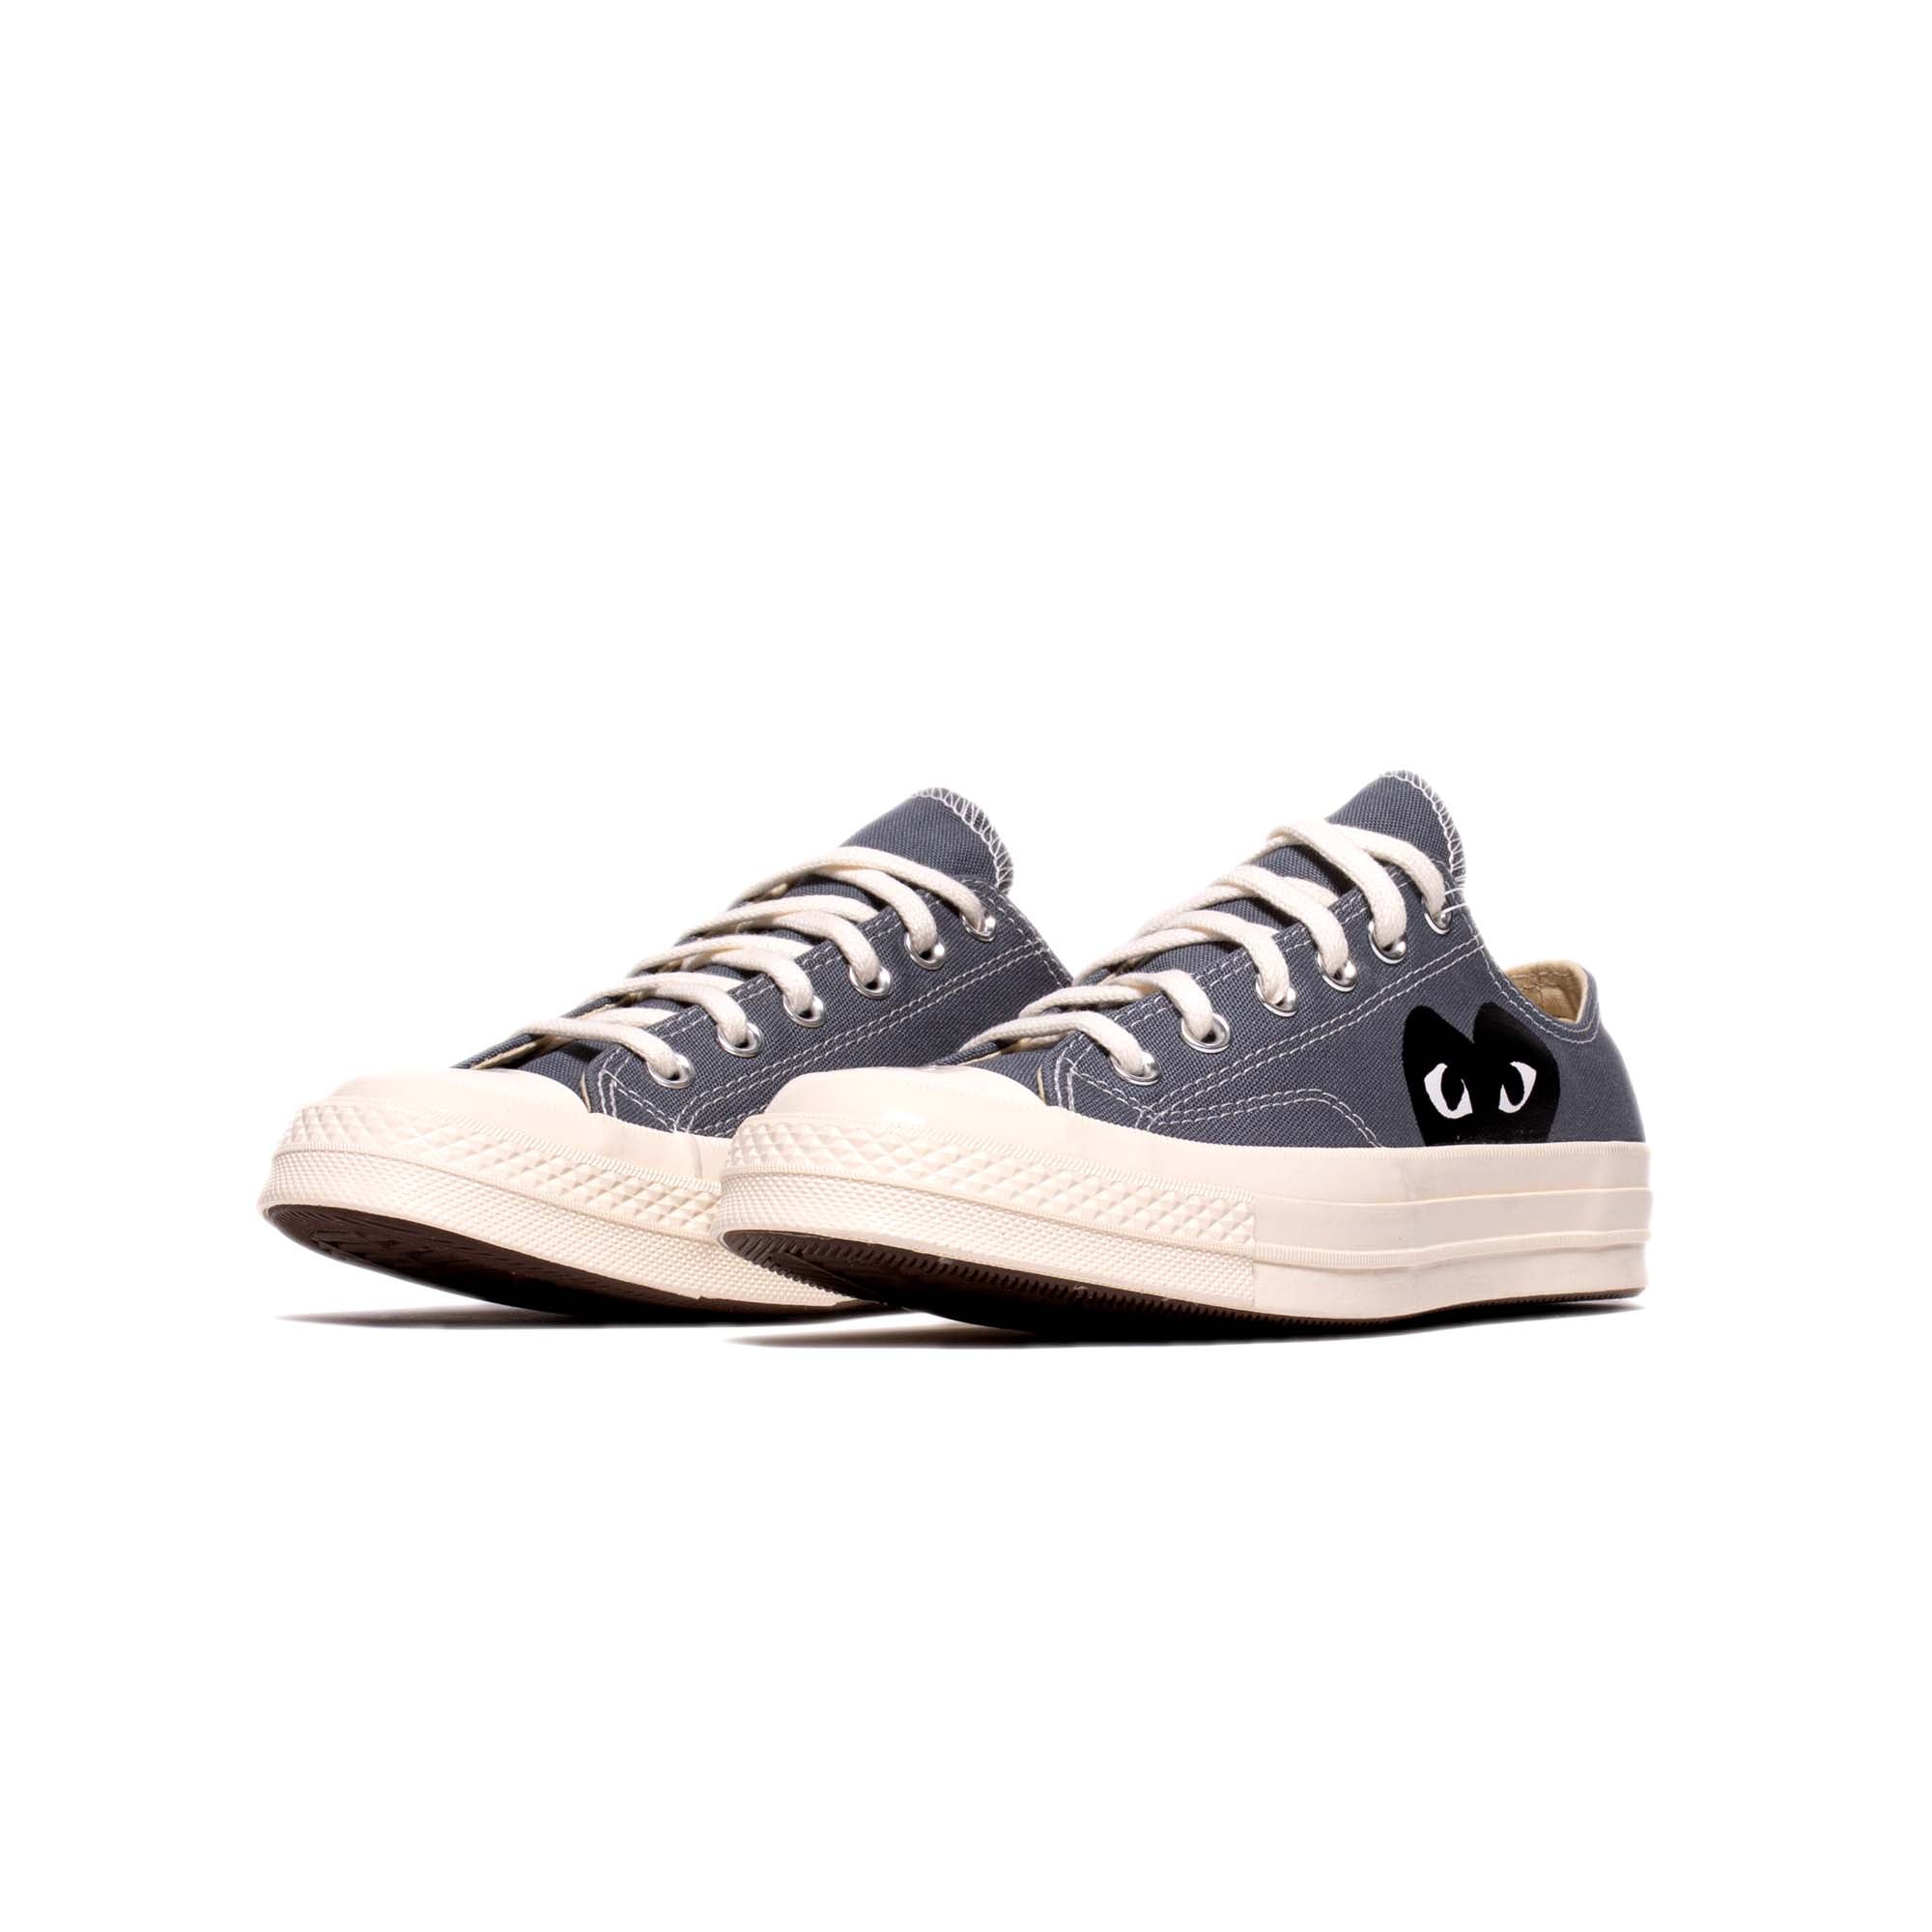 Comme des Garcons PLAY x Converse Chuck 70 Ox Shoes – Extra Butter